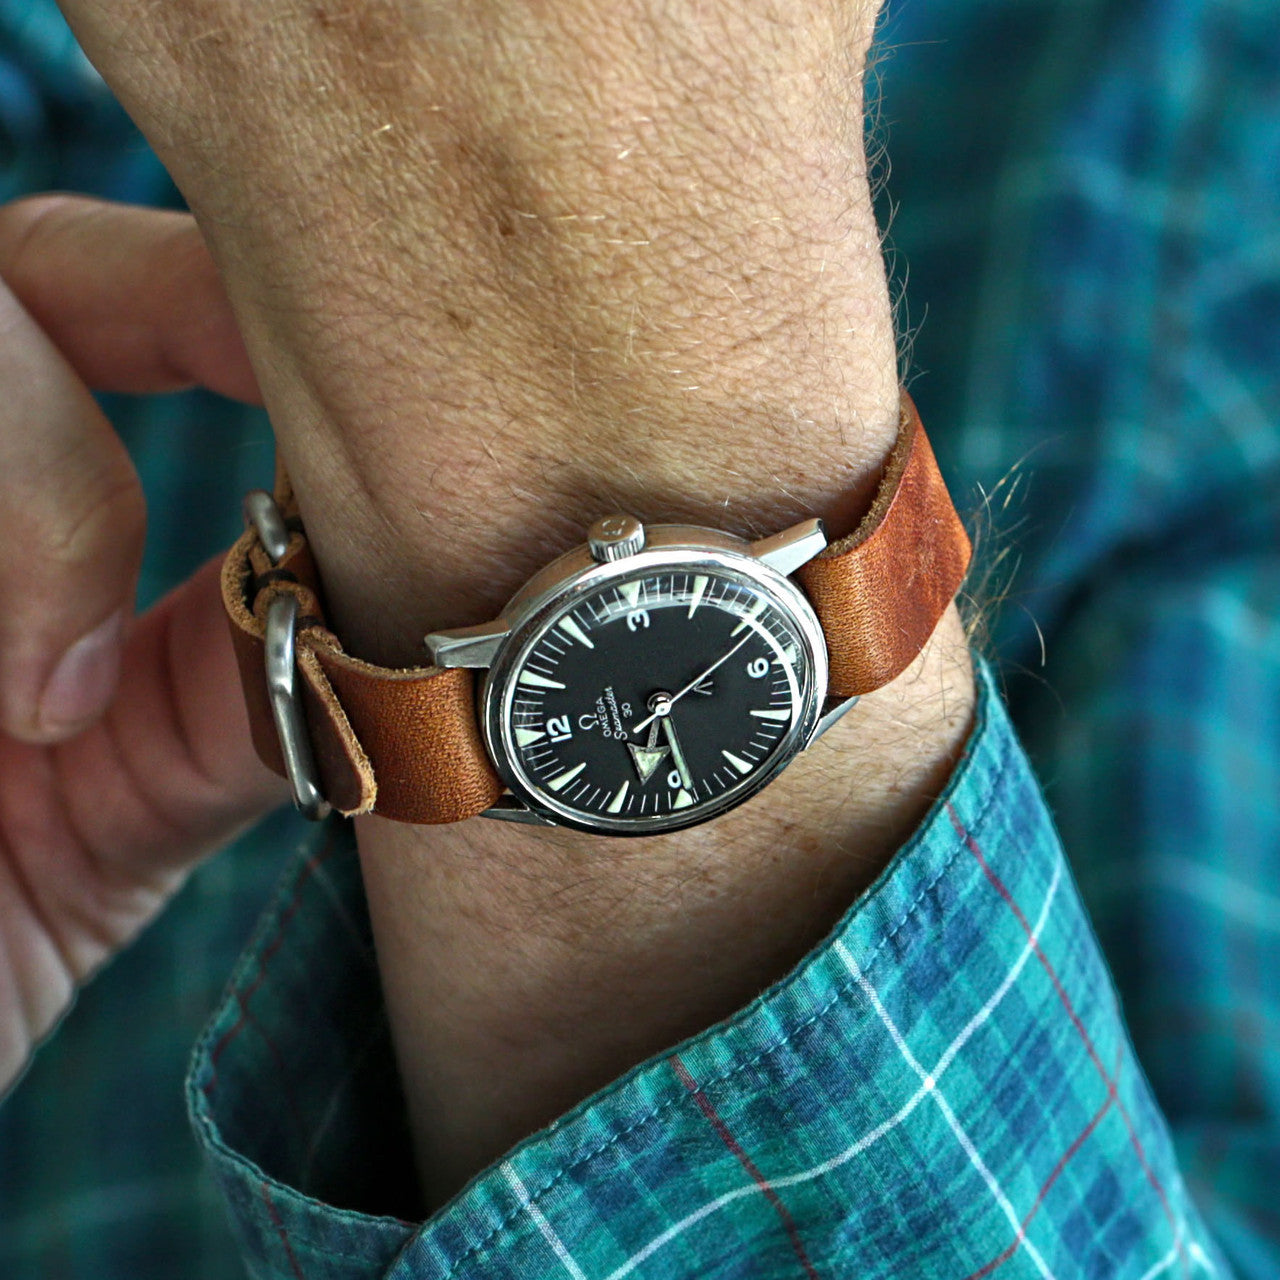 A Custom Handmade Military Single Piece Leather Watch Strap By DaLuca Straps.